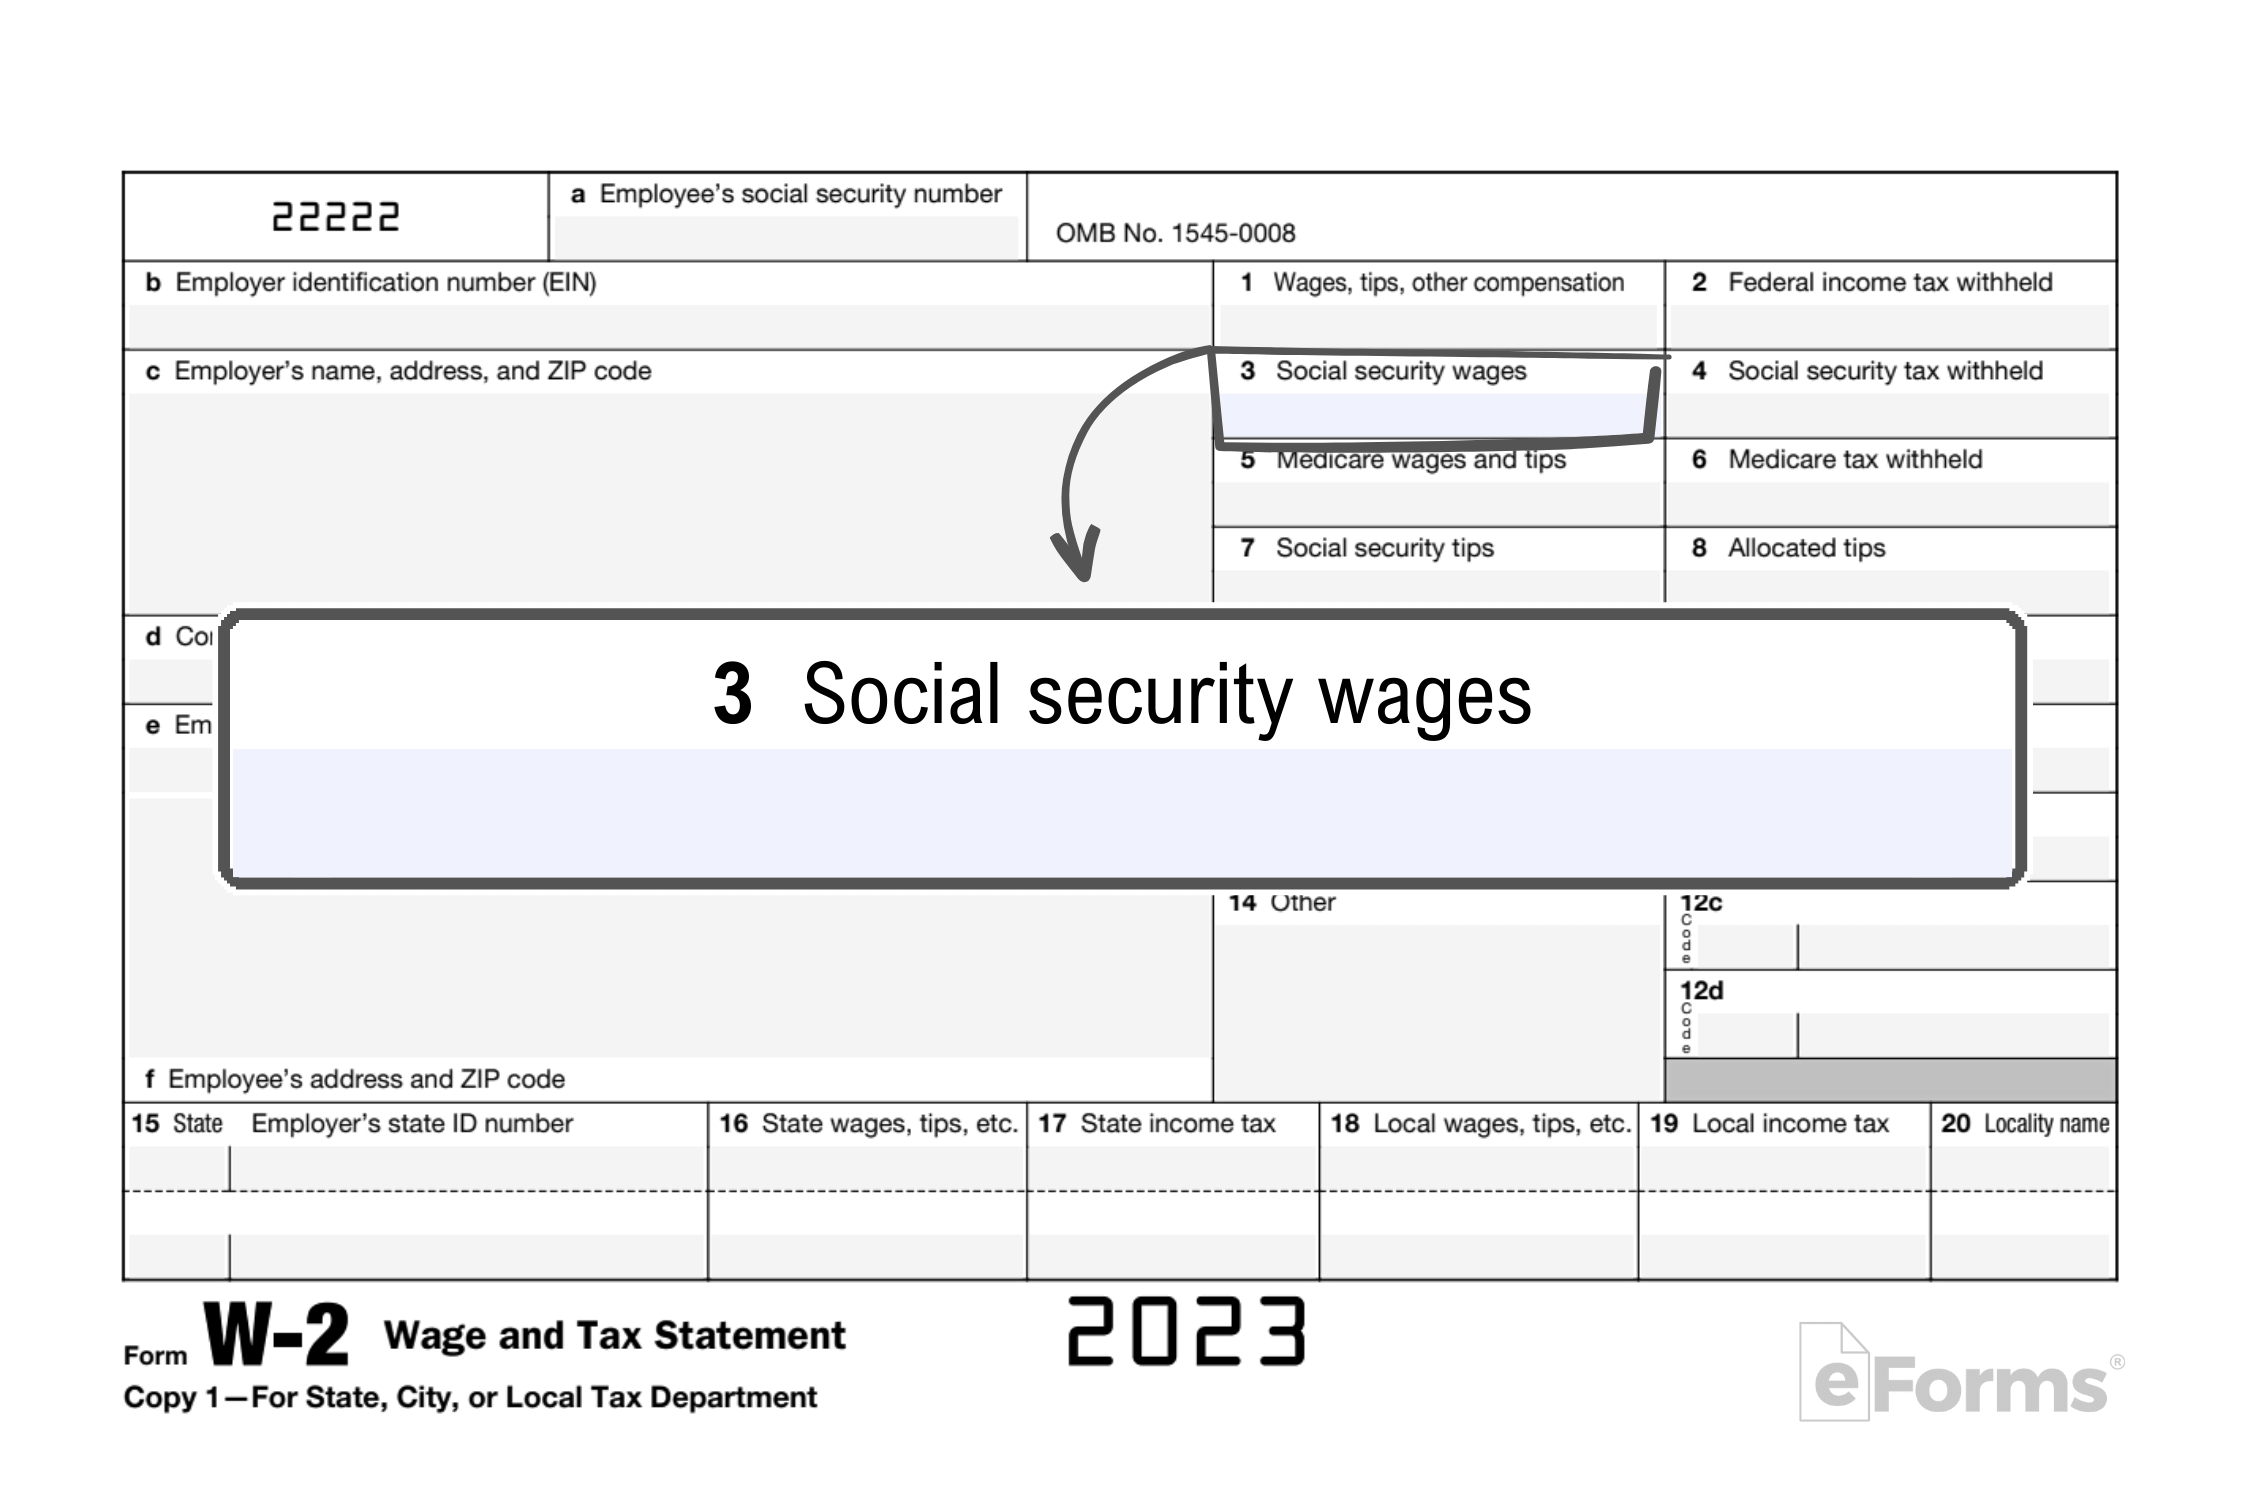 Social security wages